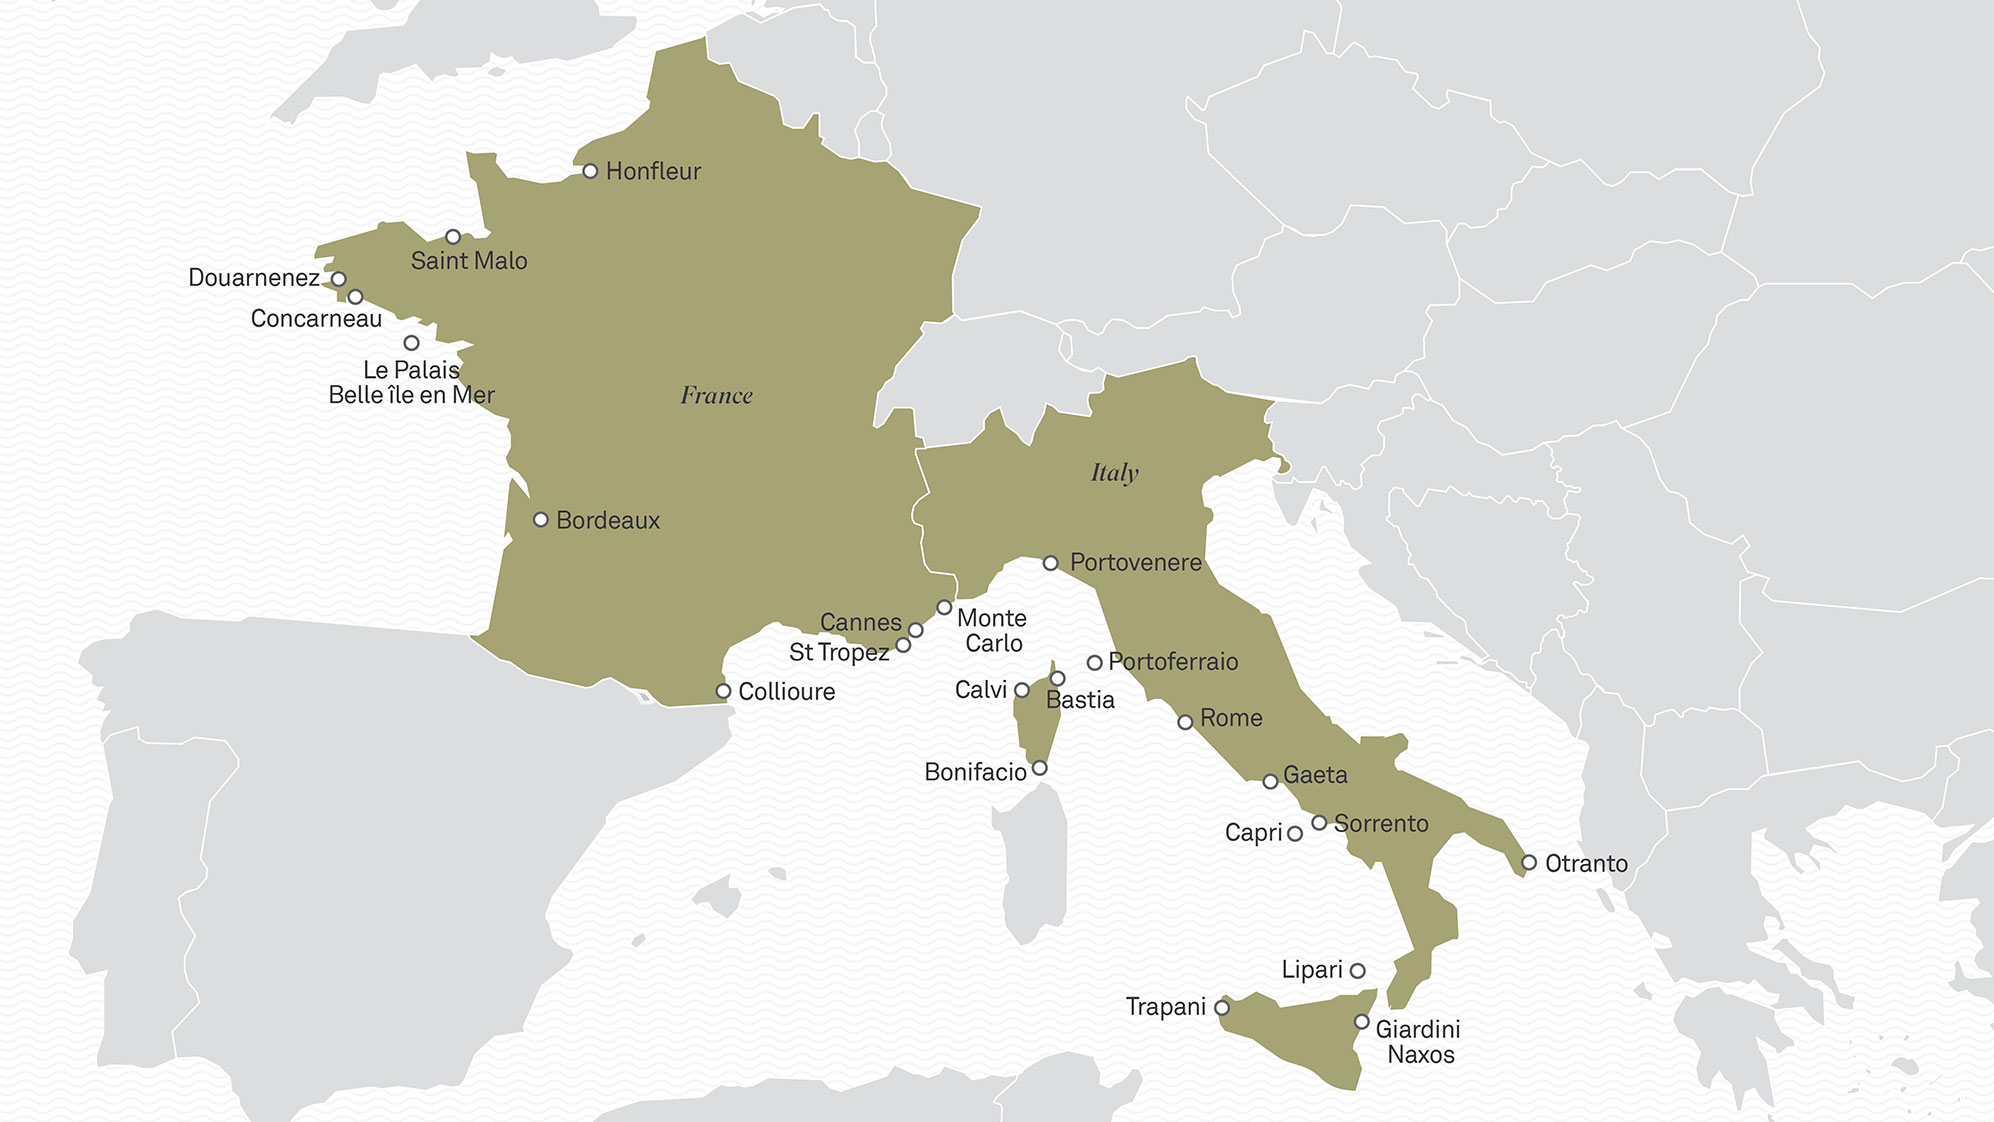 Map of France and Italy